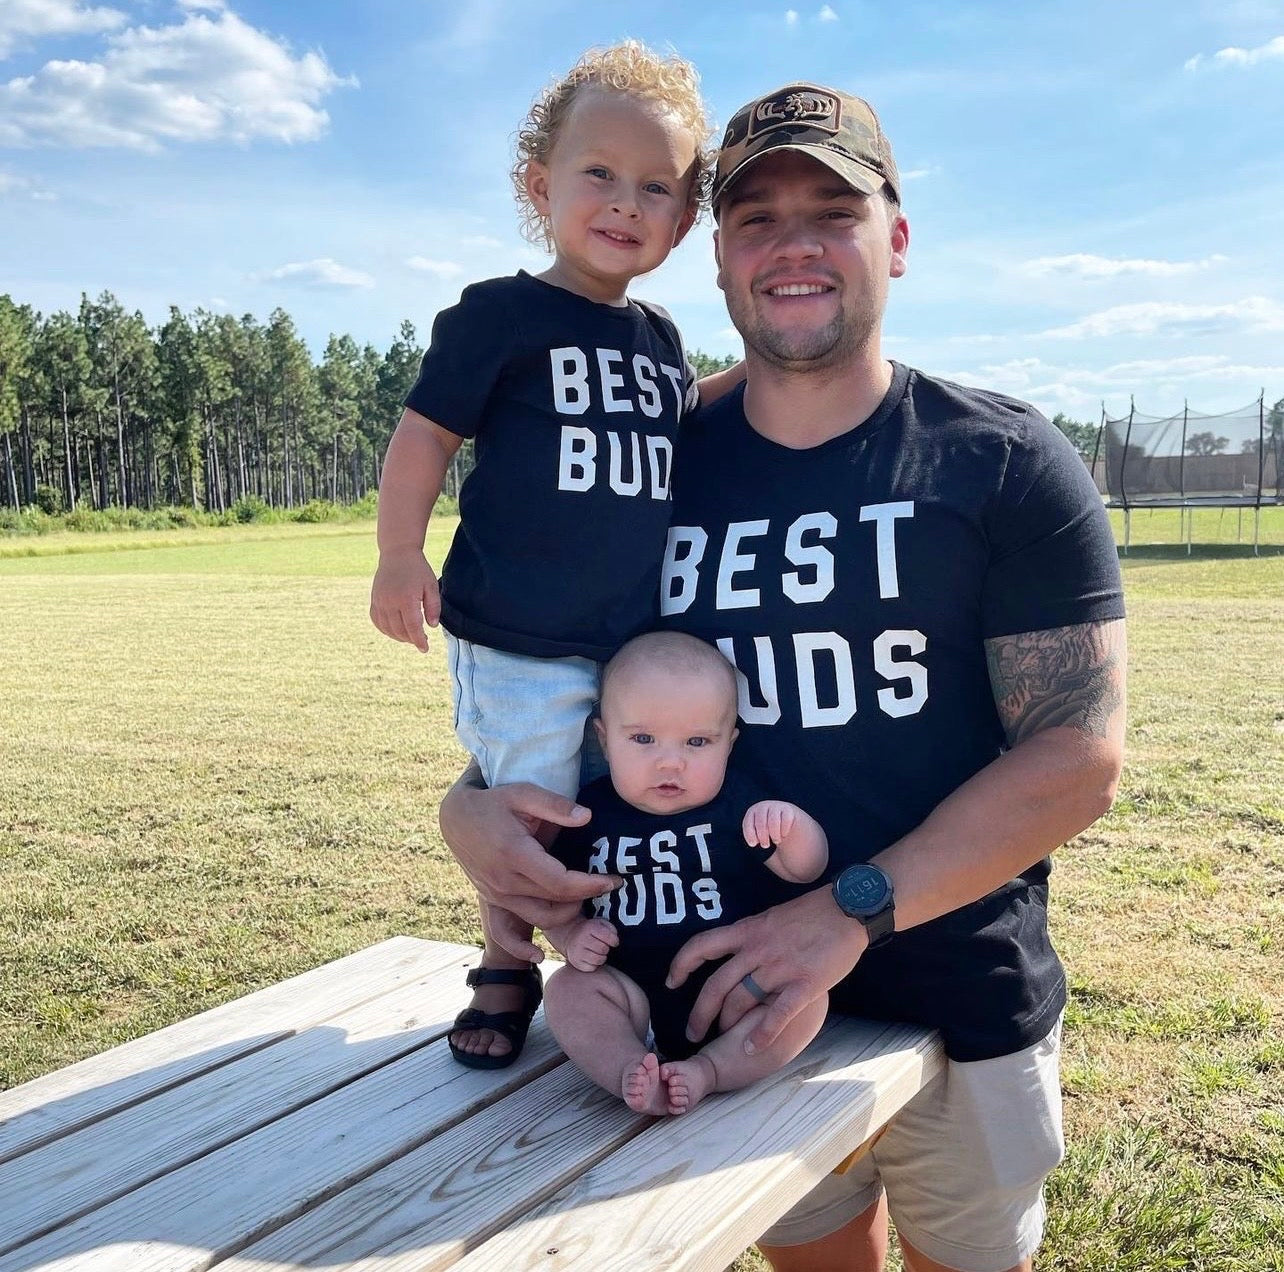 Best Buds (Across Front, White) - Tee (Charcoal Black)